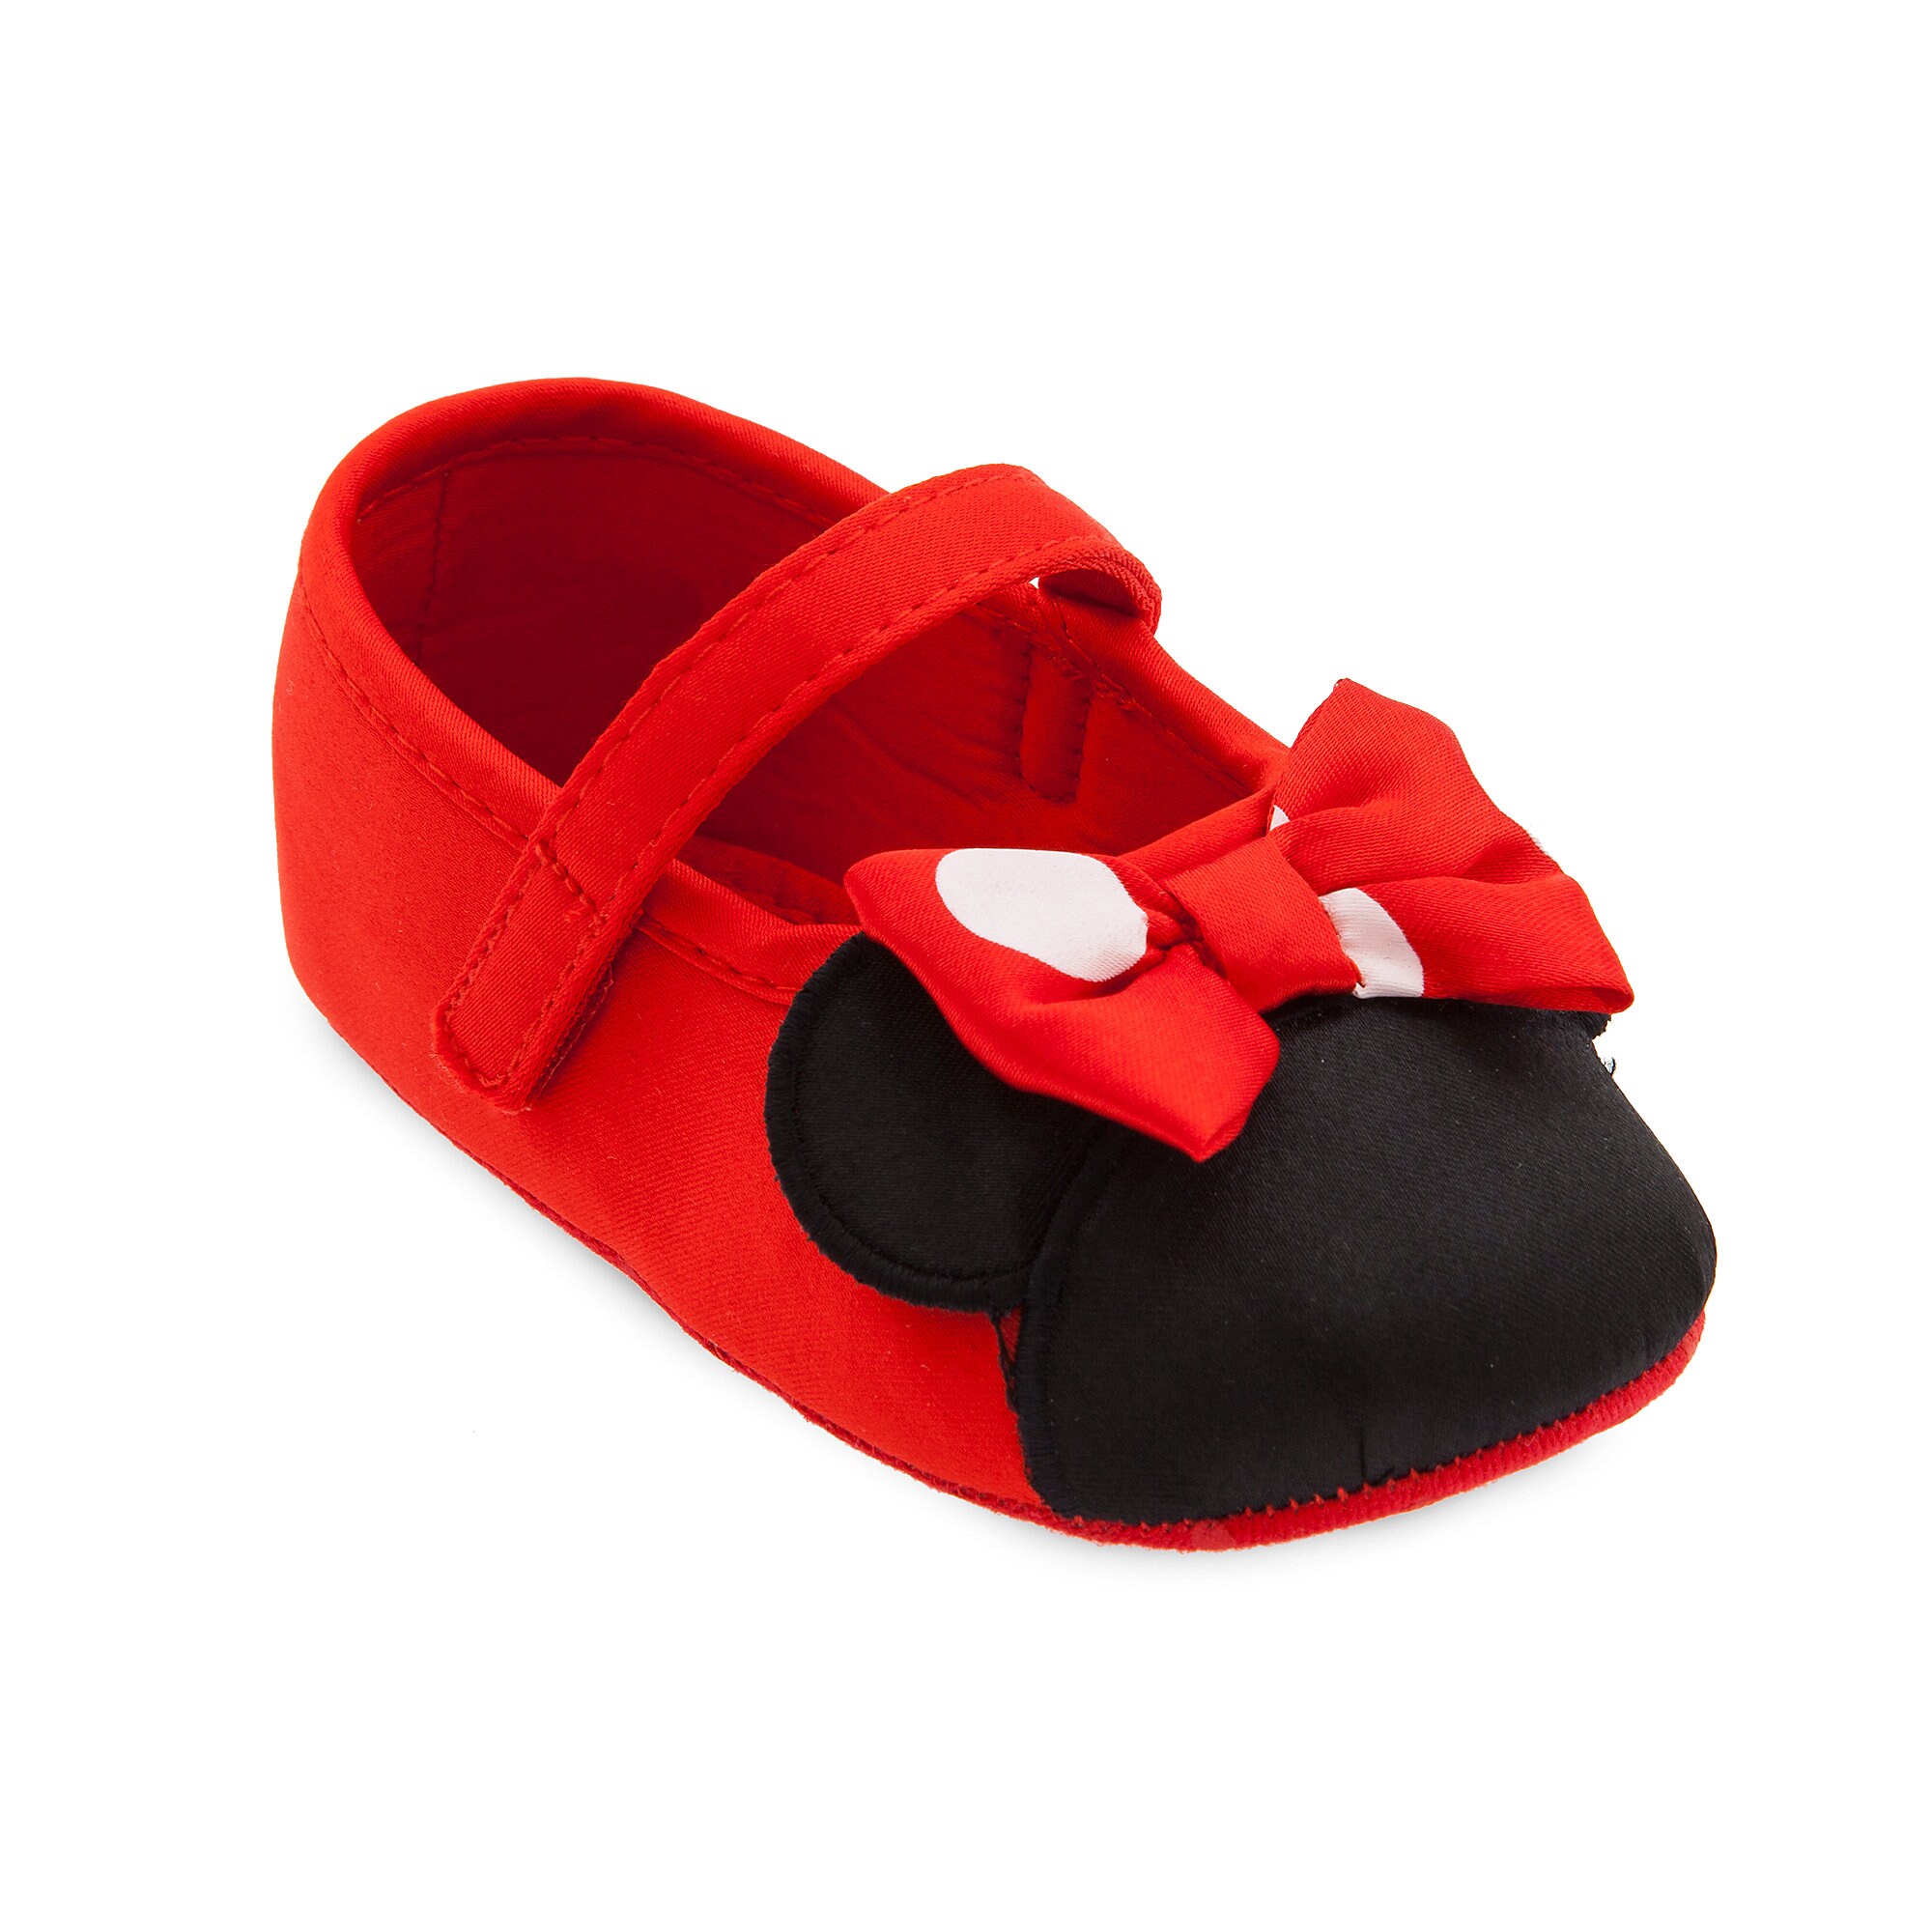 Minnie Mouse Costume Shoes for Baby - Red